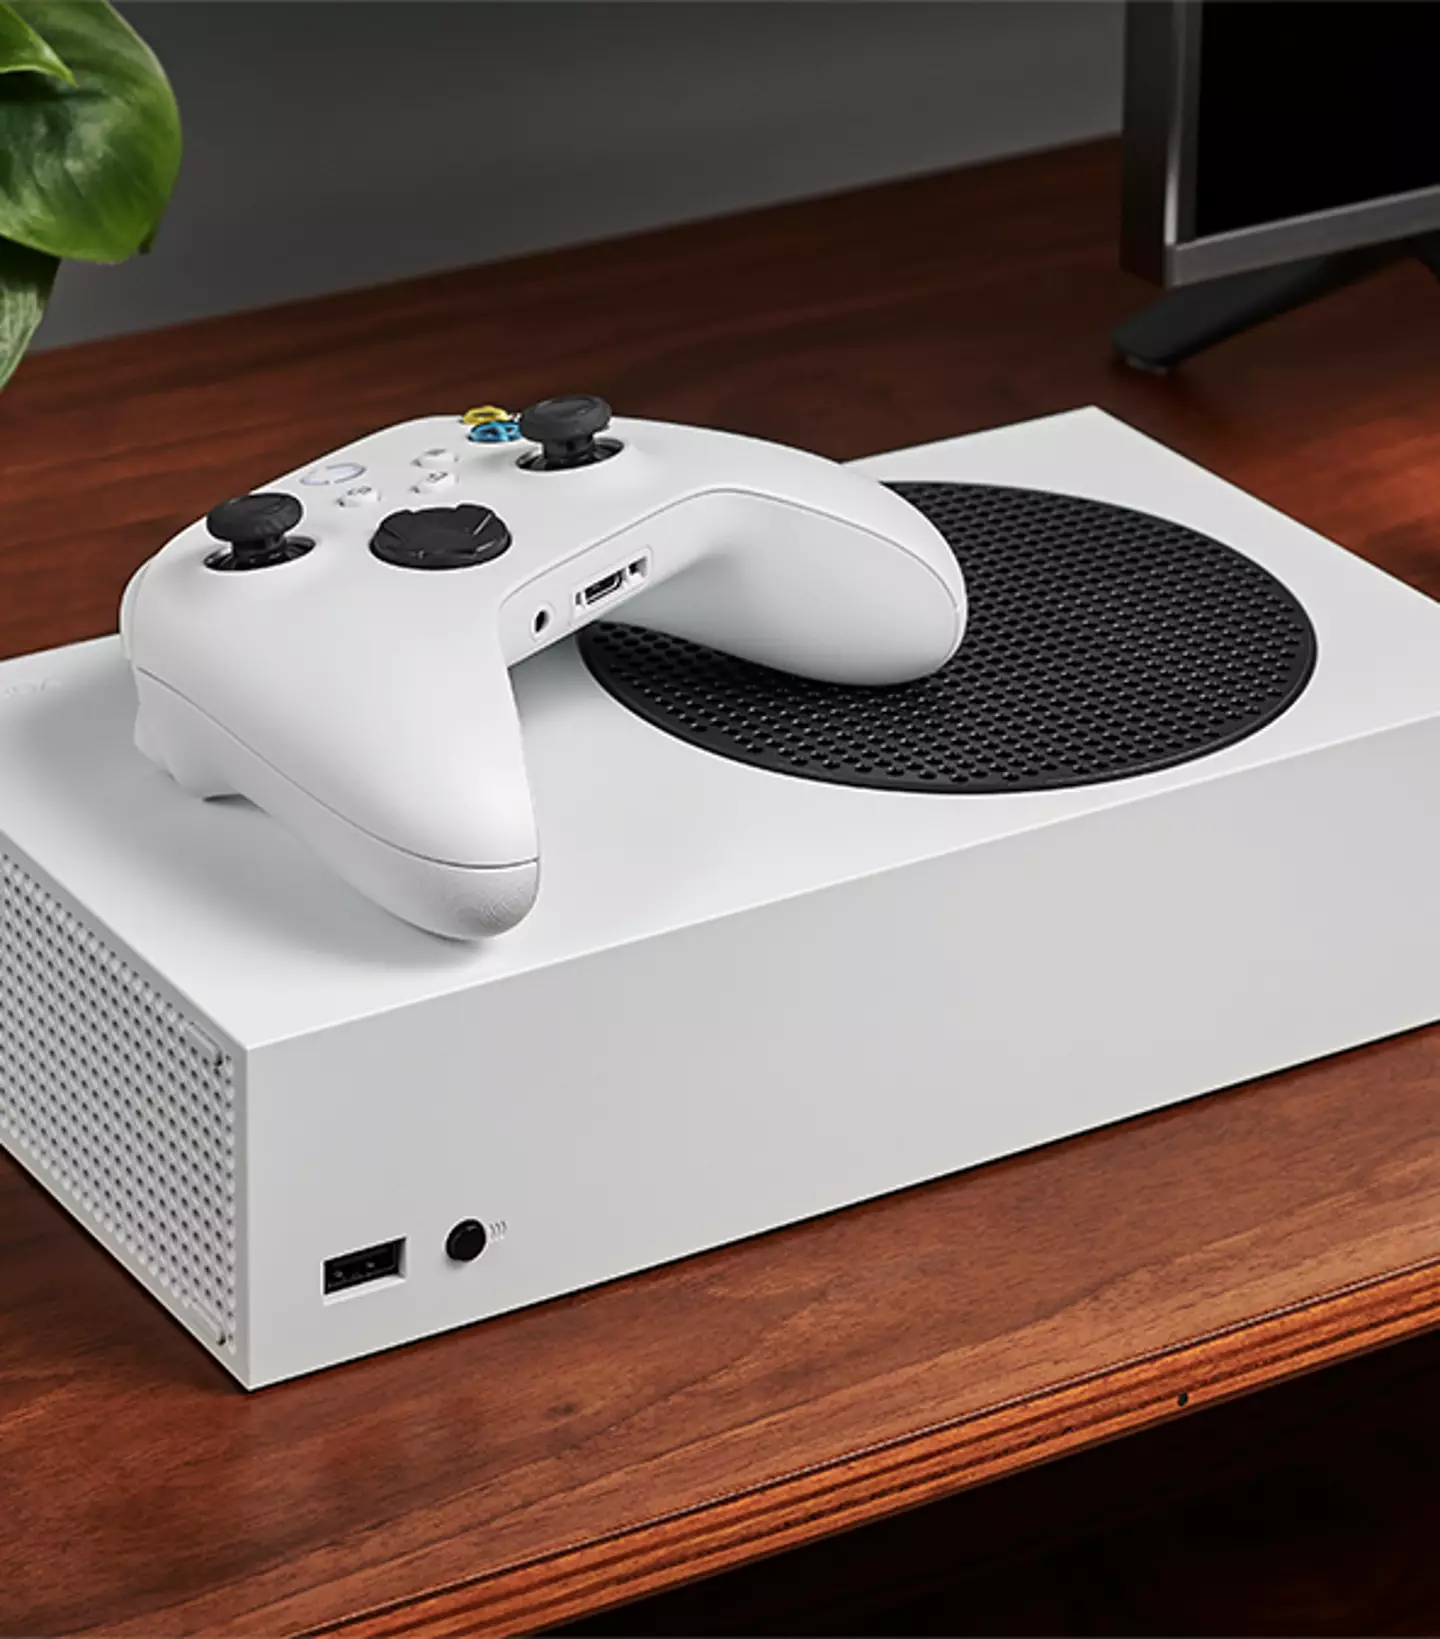 Details of the new Xbox X have been leaked / Future Publishing / Contributor / Getty